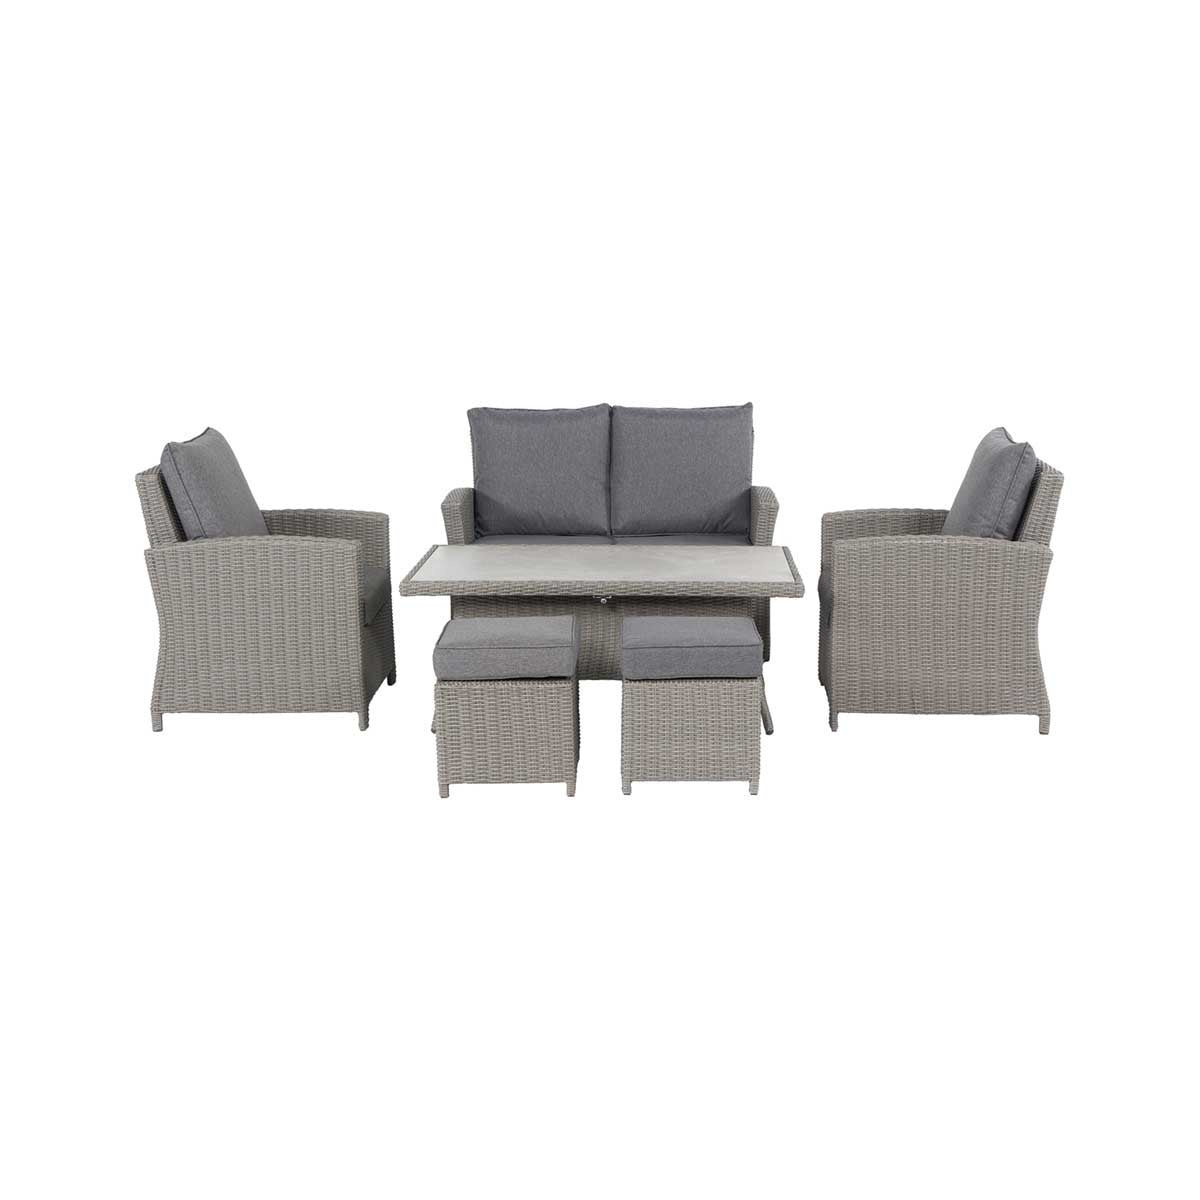 Borneo Grey Rattan Effect Garden Lounge Set with 2 Seater Sofa & Adjustable Ceramic Top Table – Click Style